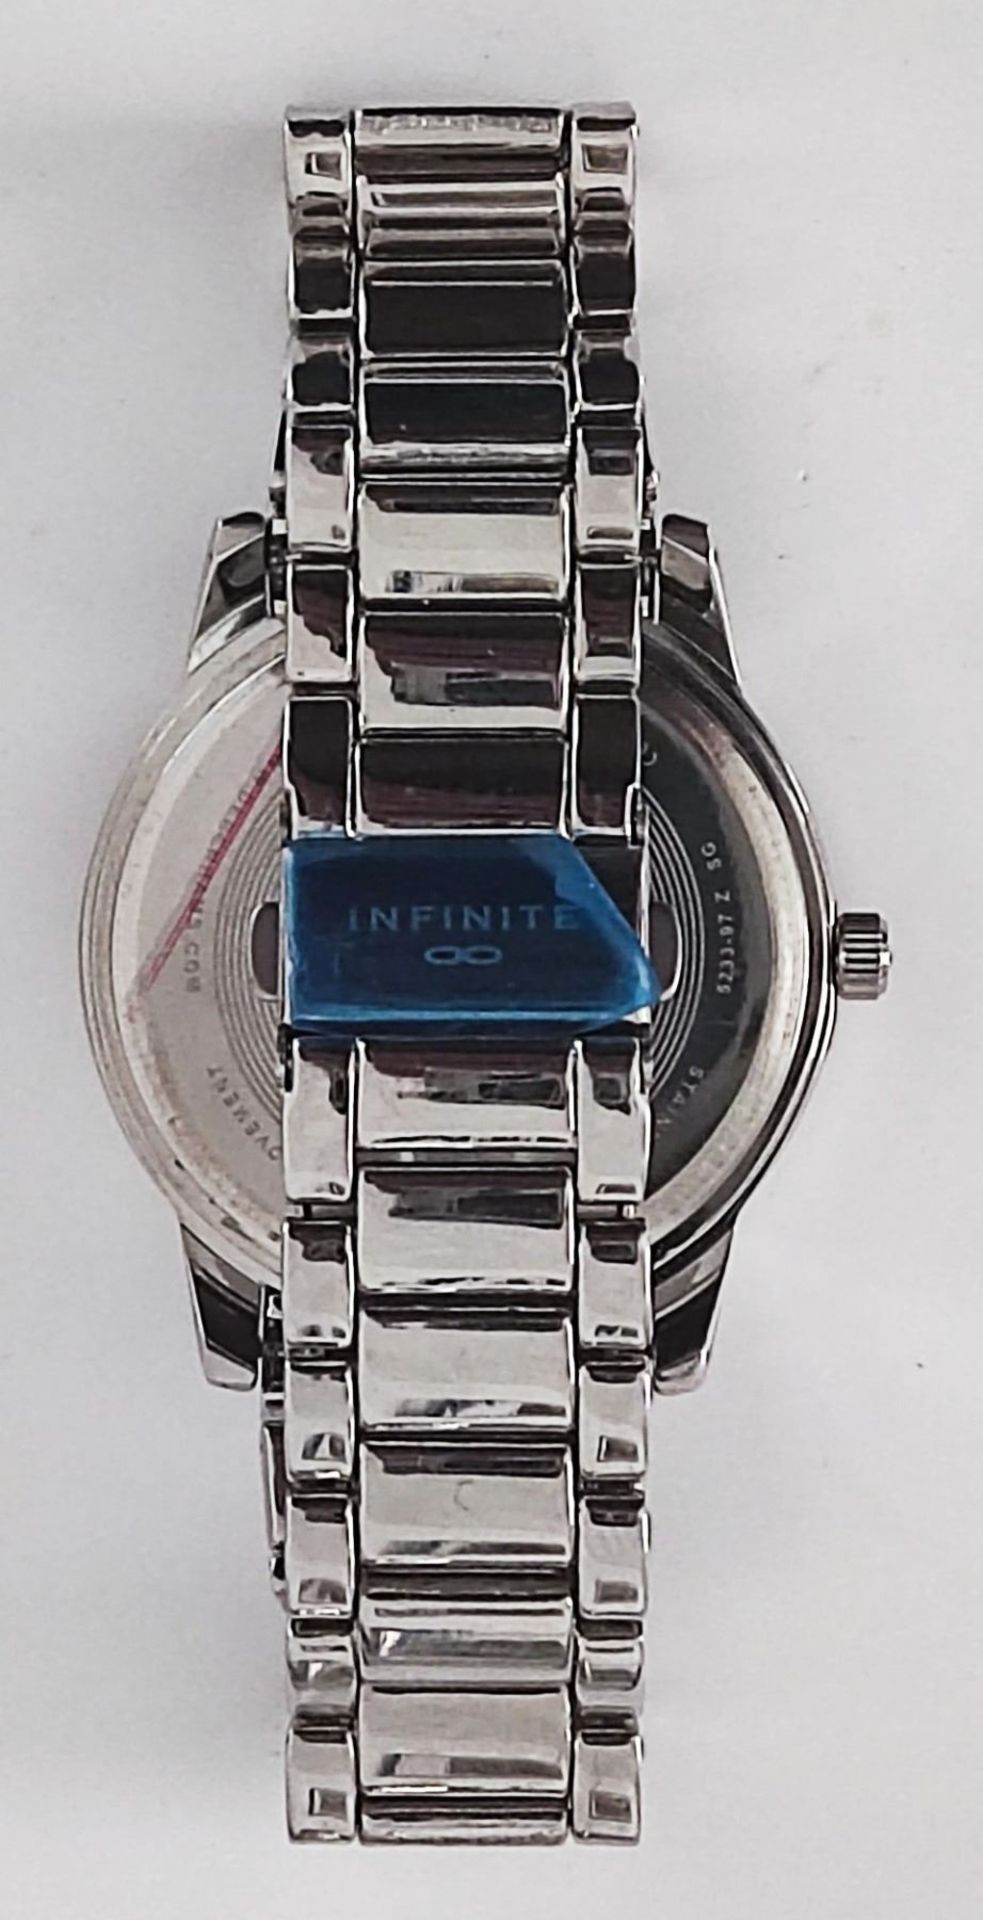 Gents Infinite wristwatch (5233-97) new with back film. - Image 2 of 3